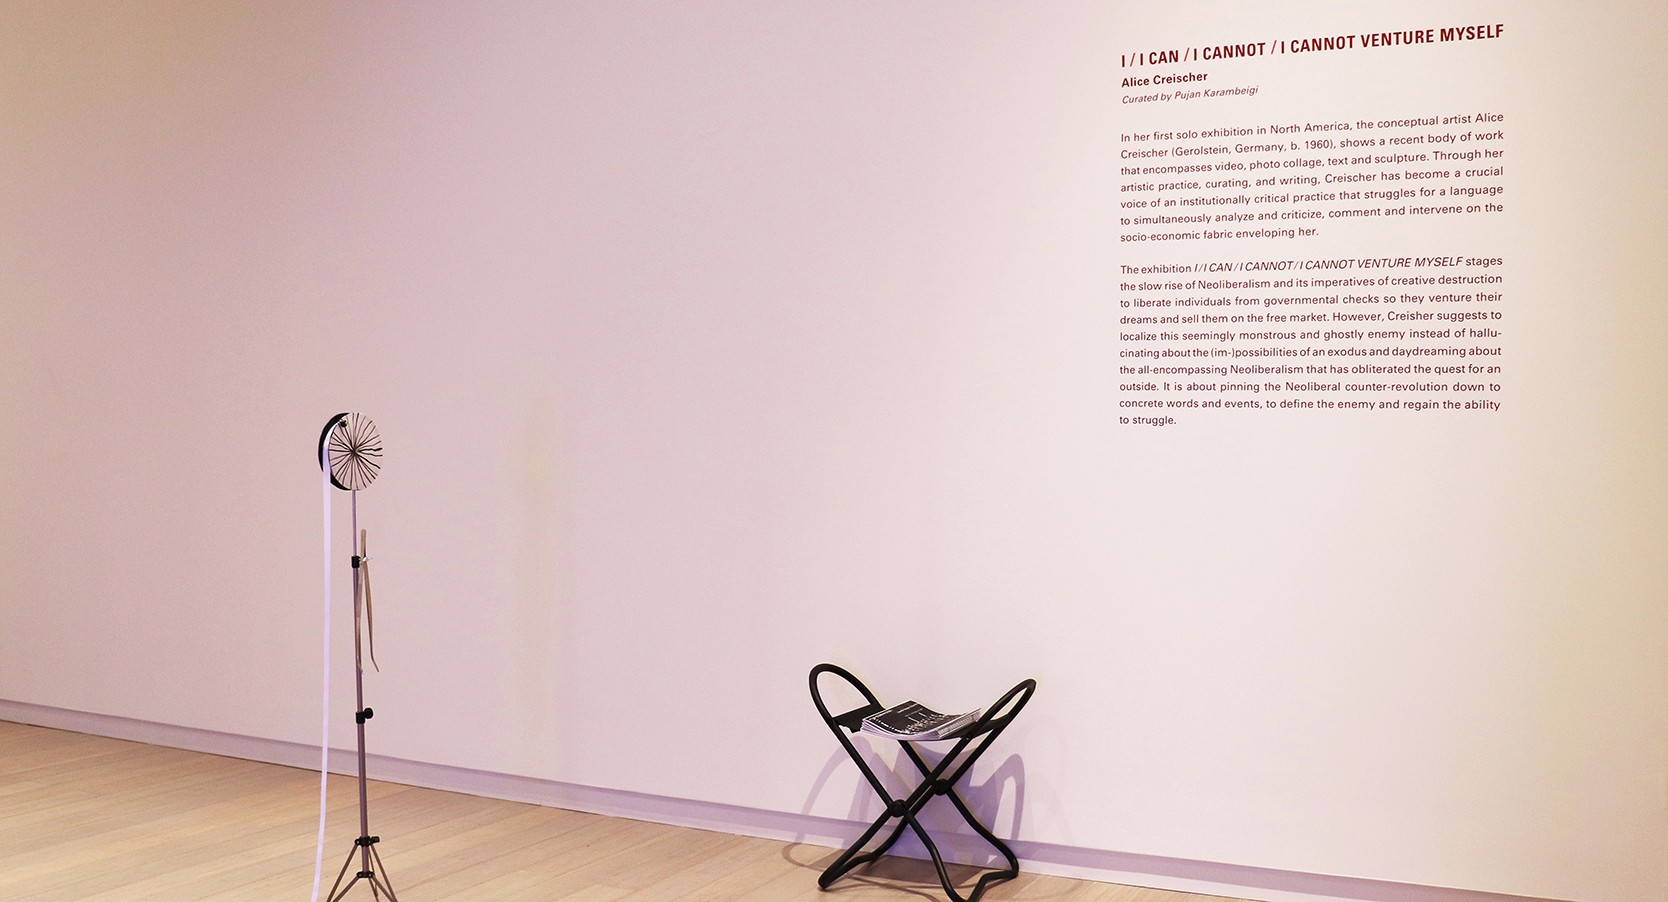 Installation view of the exhibition “MODA 2019: I/I CAN/I CANNOT/ I CANNOT VENTURE MYSELF” on view at the Wallach Art Gallery, Columbia University March 30, 2019 – April 14, 2019. Photo by Eddie Bartolomei.